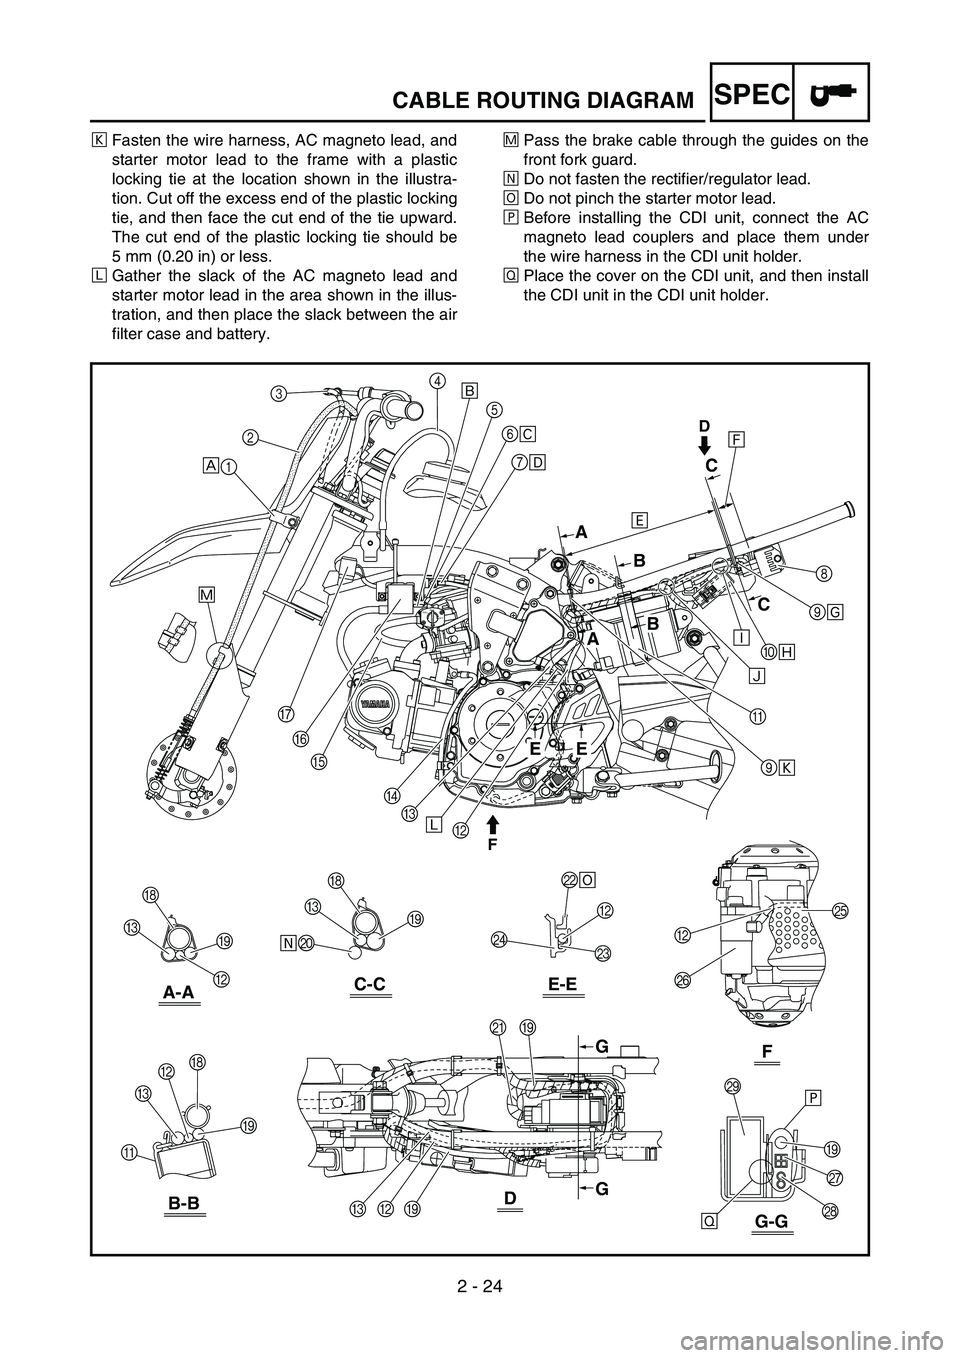 YAMAHA TTR50 2006  Notices Demploi (in French) 
2 - 24
SPECCABLE ROUTING DIAGRAM
ÒFasten the wire harness, AC magneto lead, and
starter motor lead to the frame with a plastic
locking tie at the location shown in the illustra-
tion. Cut off the ex